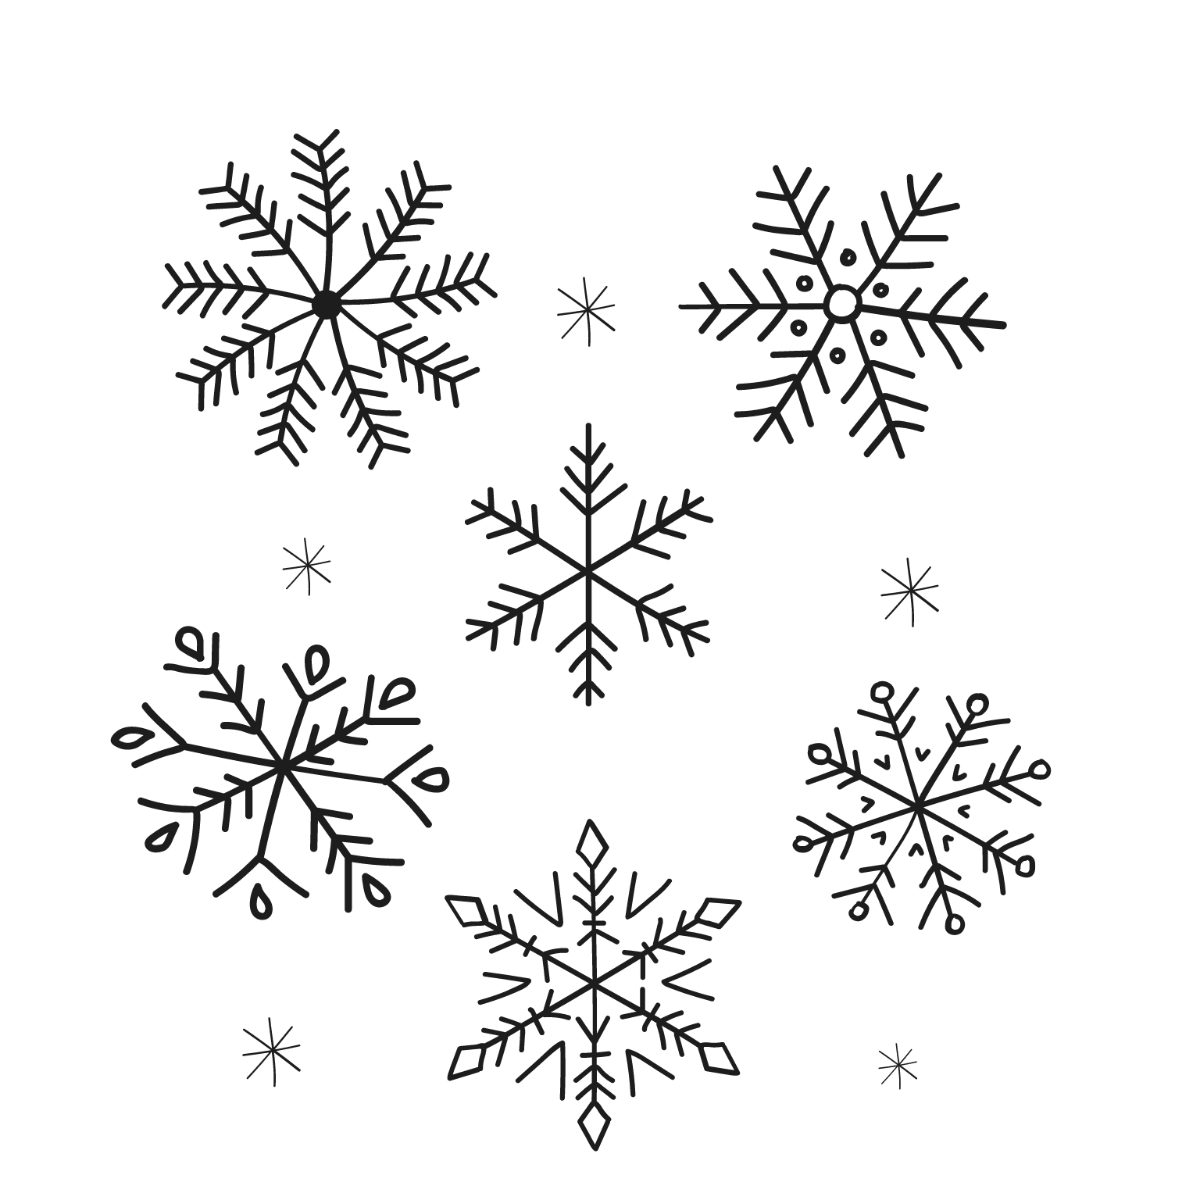 FREE Snowflake Vector - Image Download in Illustrator, Photoshop, EPS ...